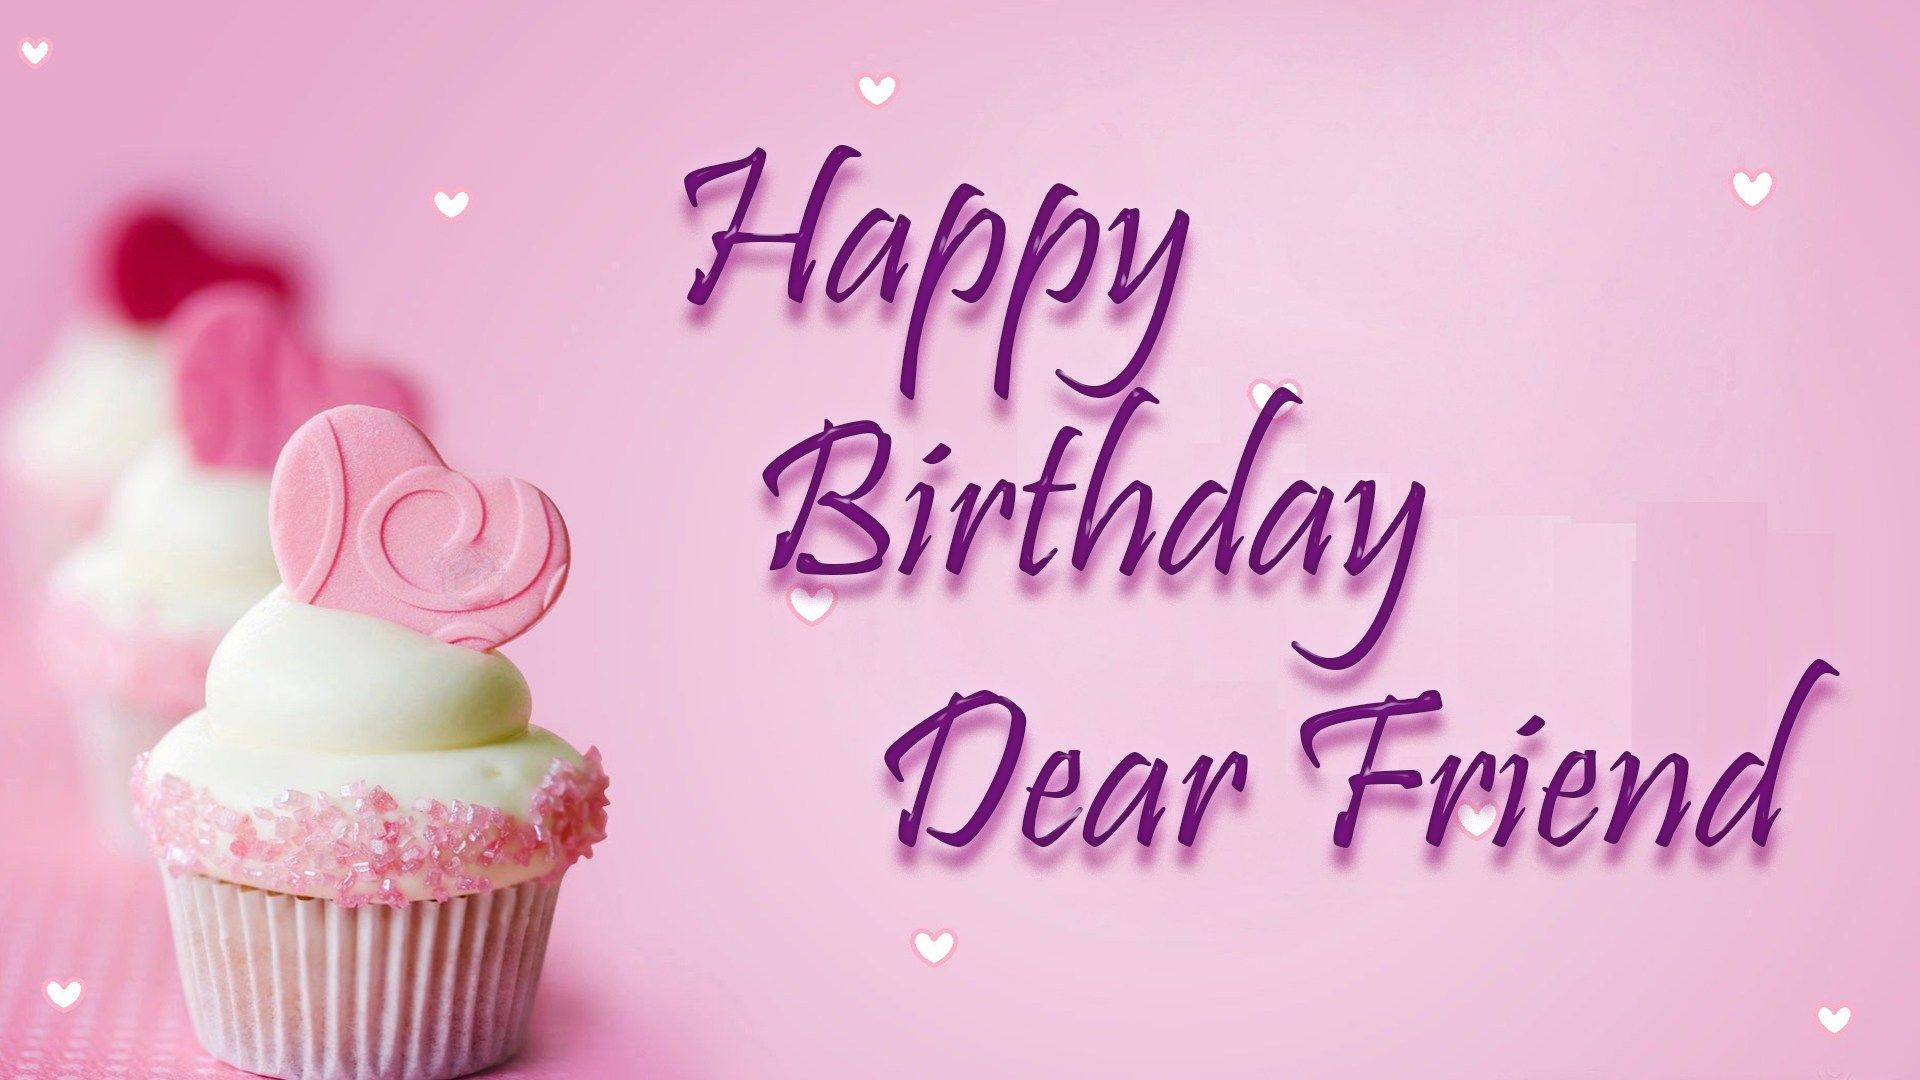 Happy Birthday Friend HD Image & Picture. Birthday Greeting Cards